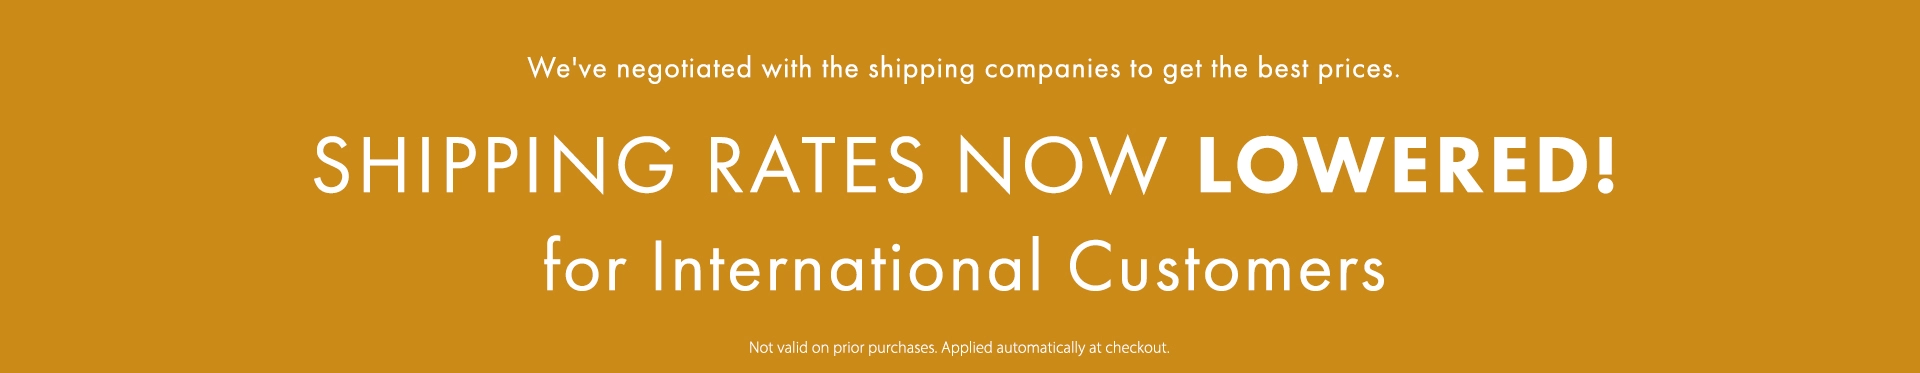 New Lower International Shipping Costs